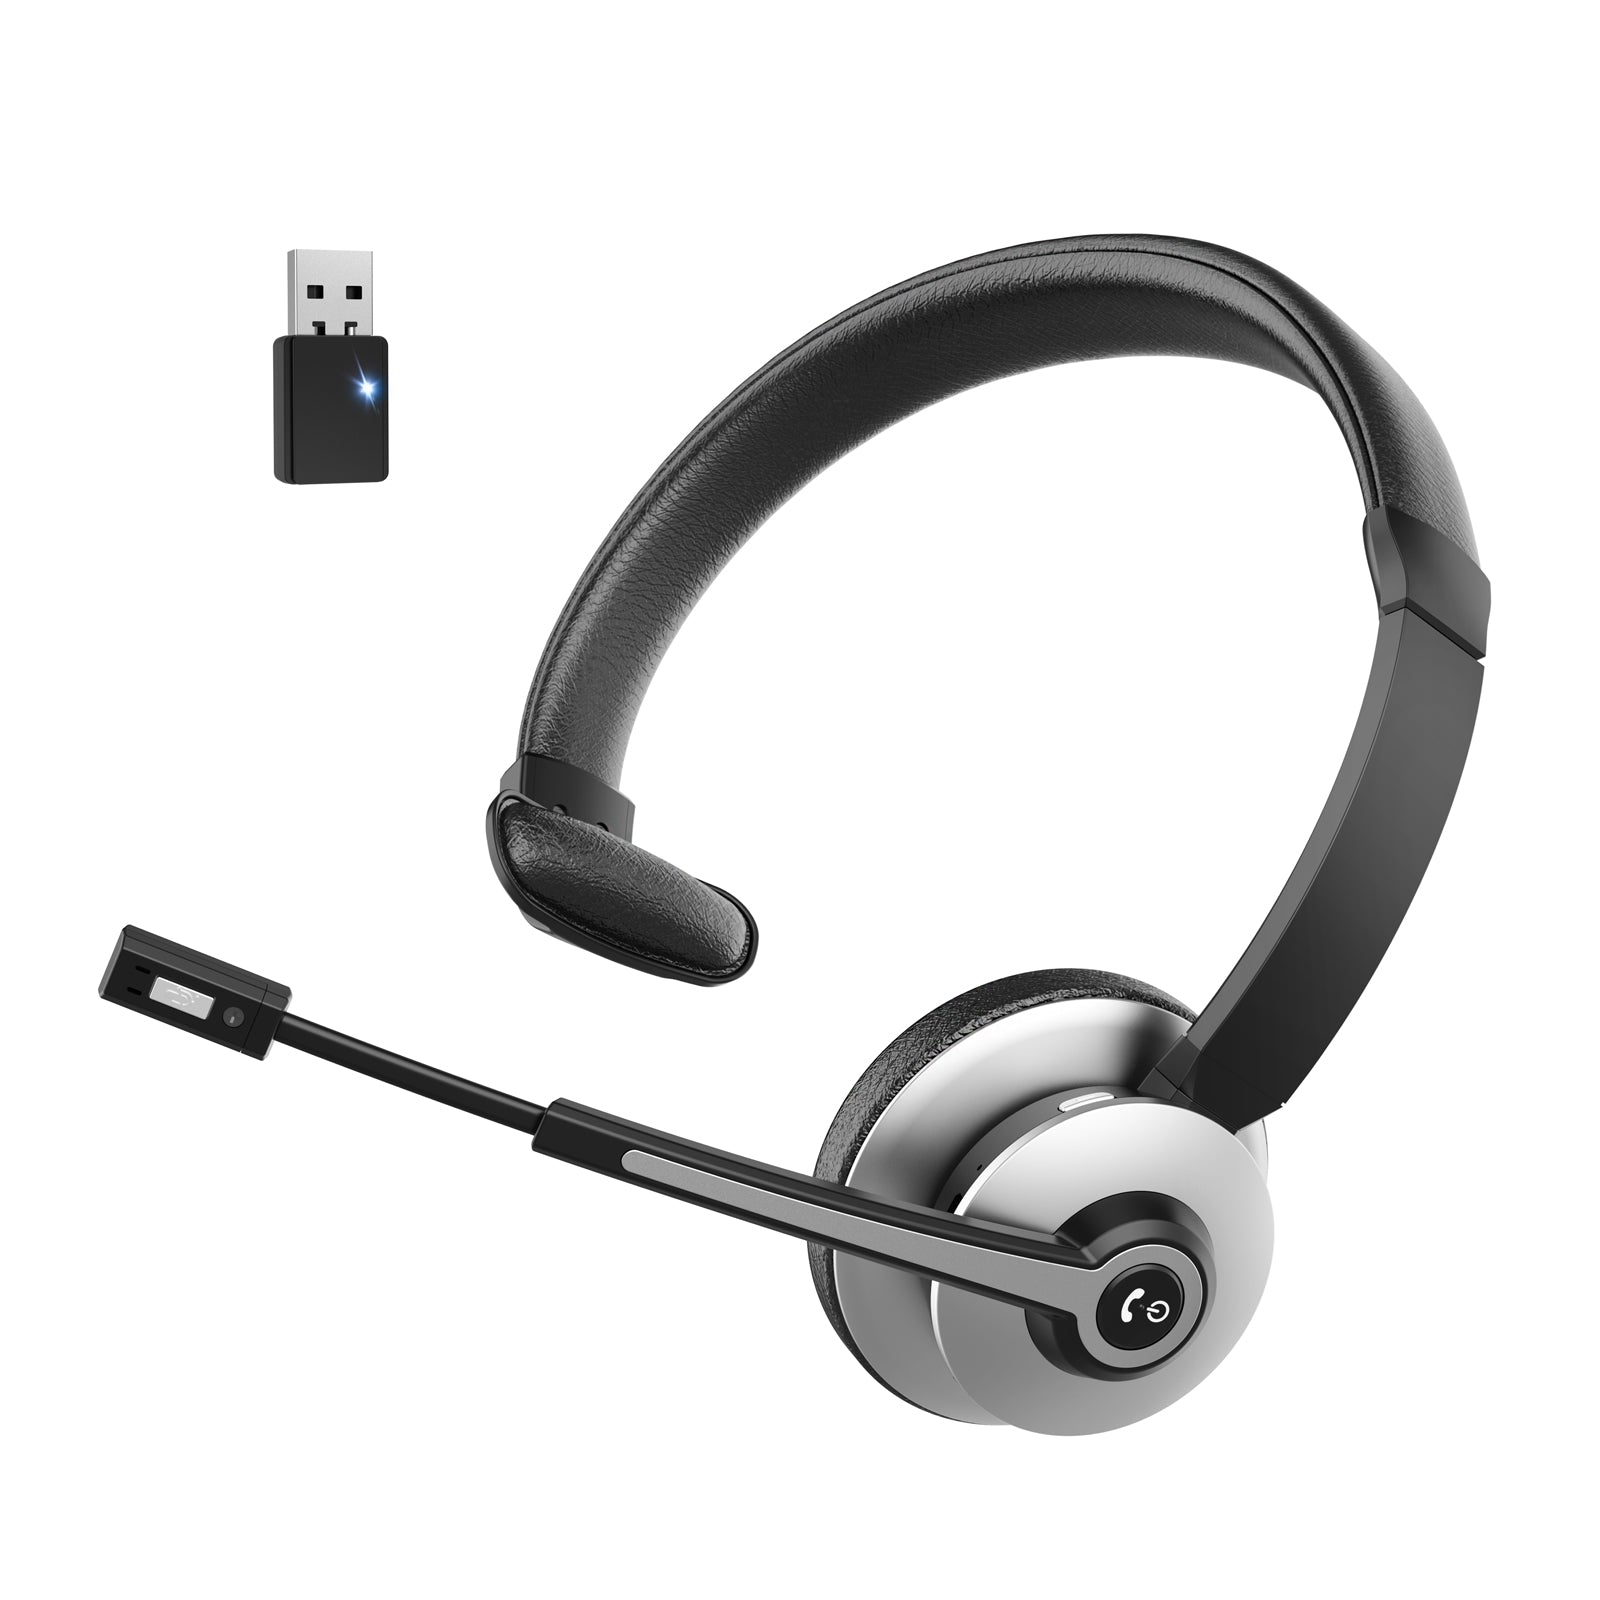 Trucker Bluetooth Headset,Wireless Headset with Microphone V5.3 with Noise Canceling Microphone & USB Dongle,Bluetooth Headset 28Hrs Working Time for Office Computer Work Cell Phone Black Silver